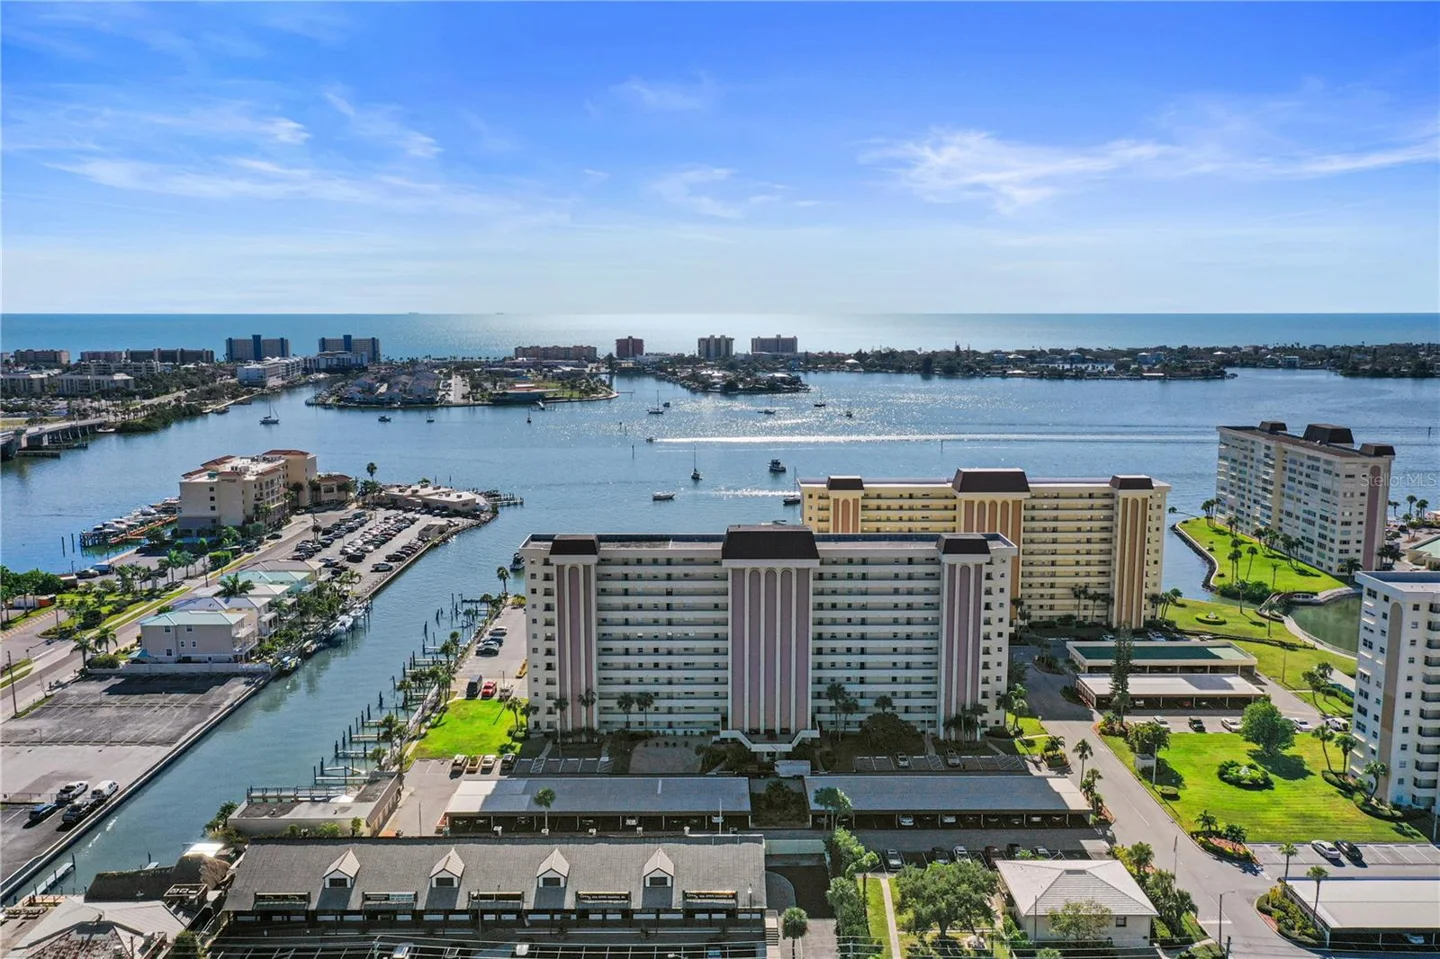 Active 55+ Community on the Intracoastal Waterway